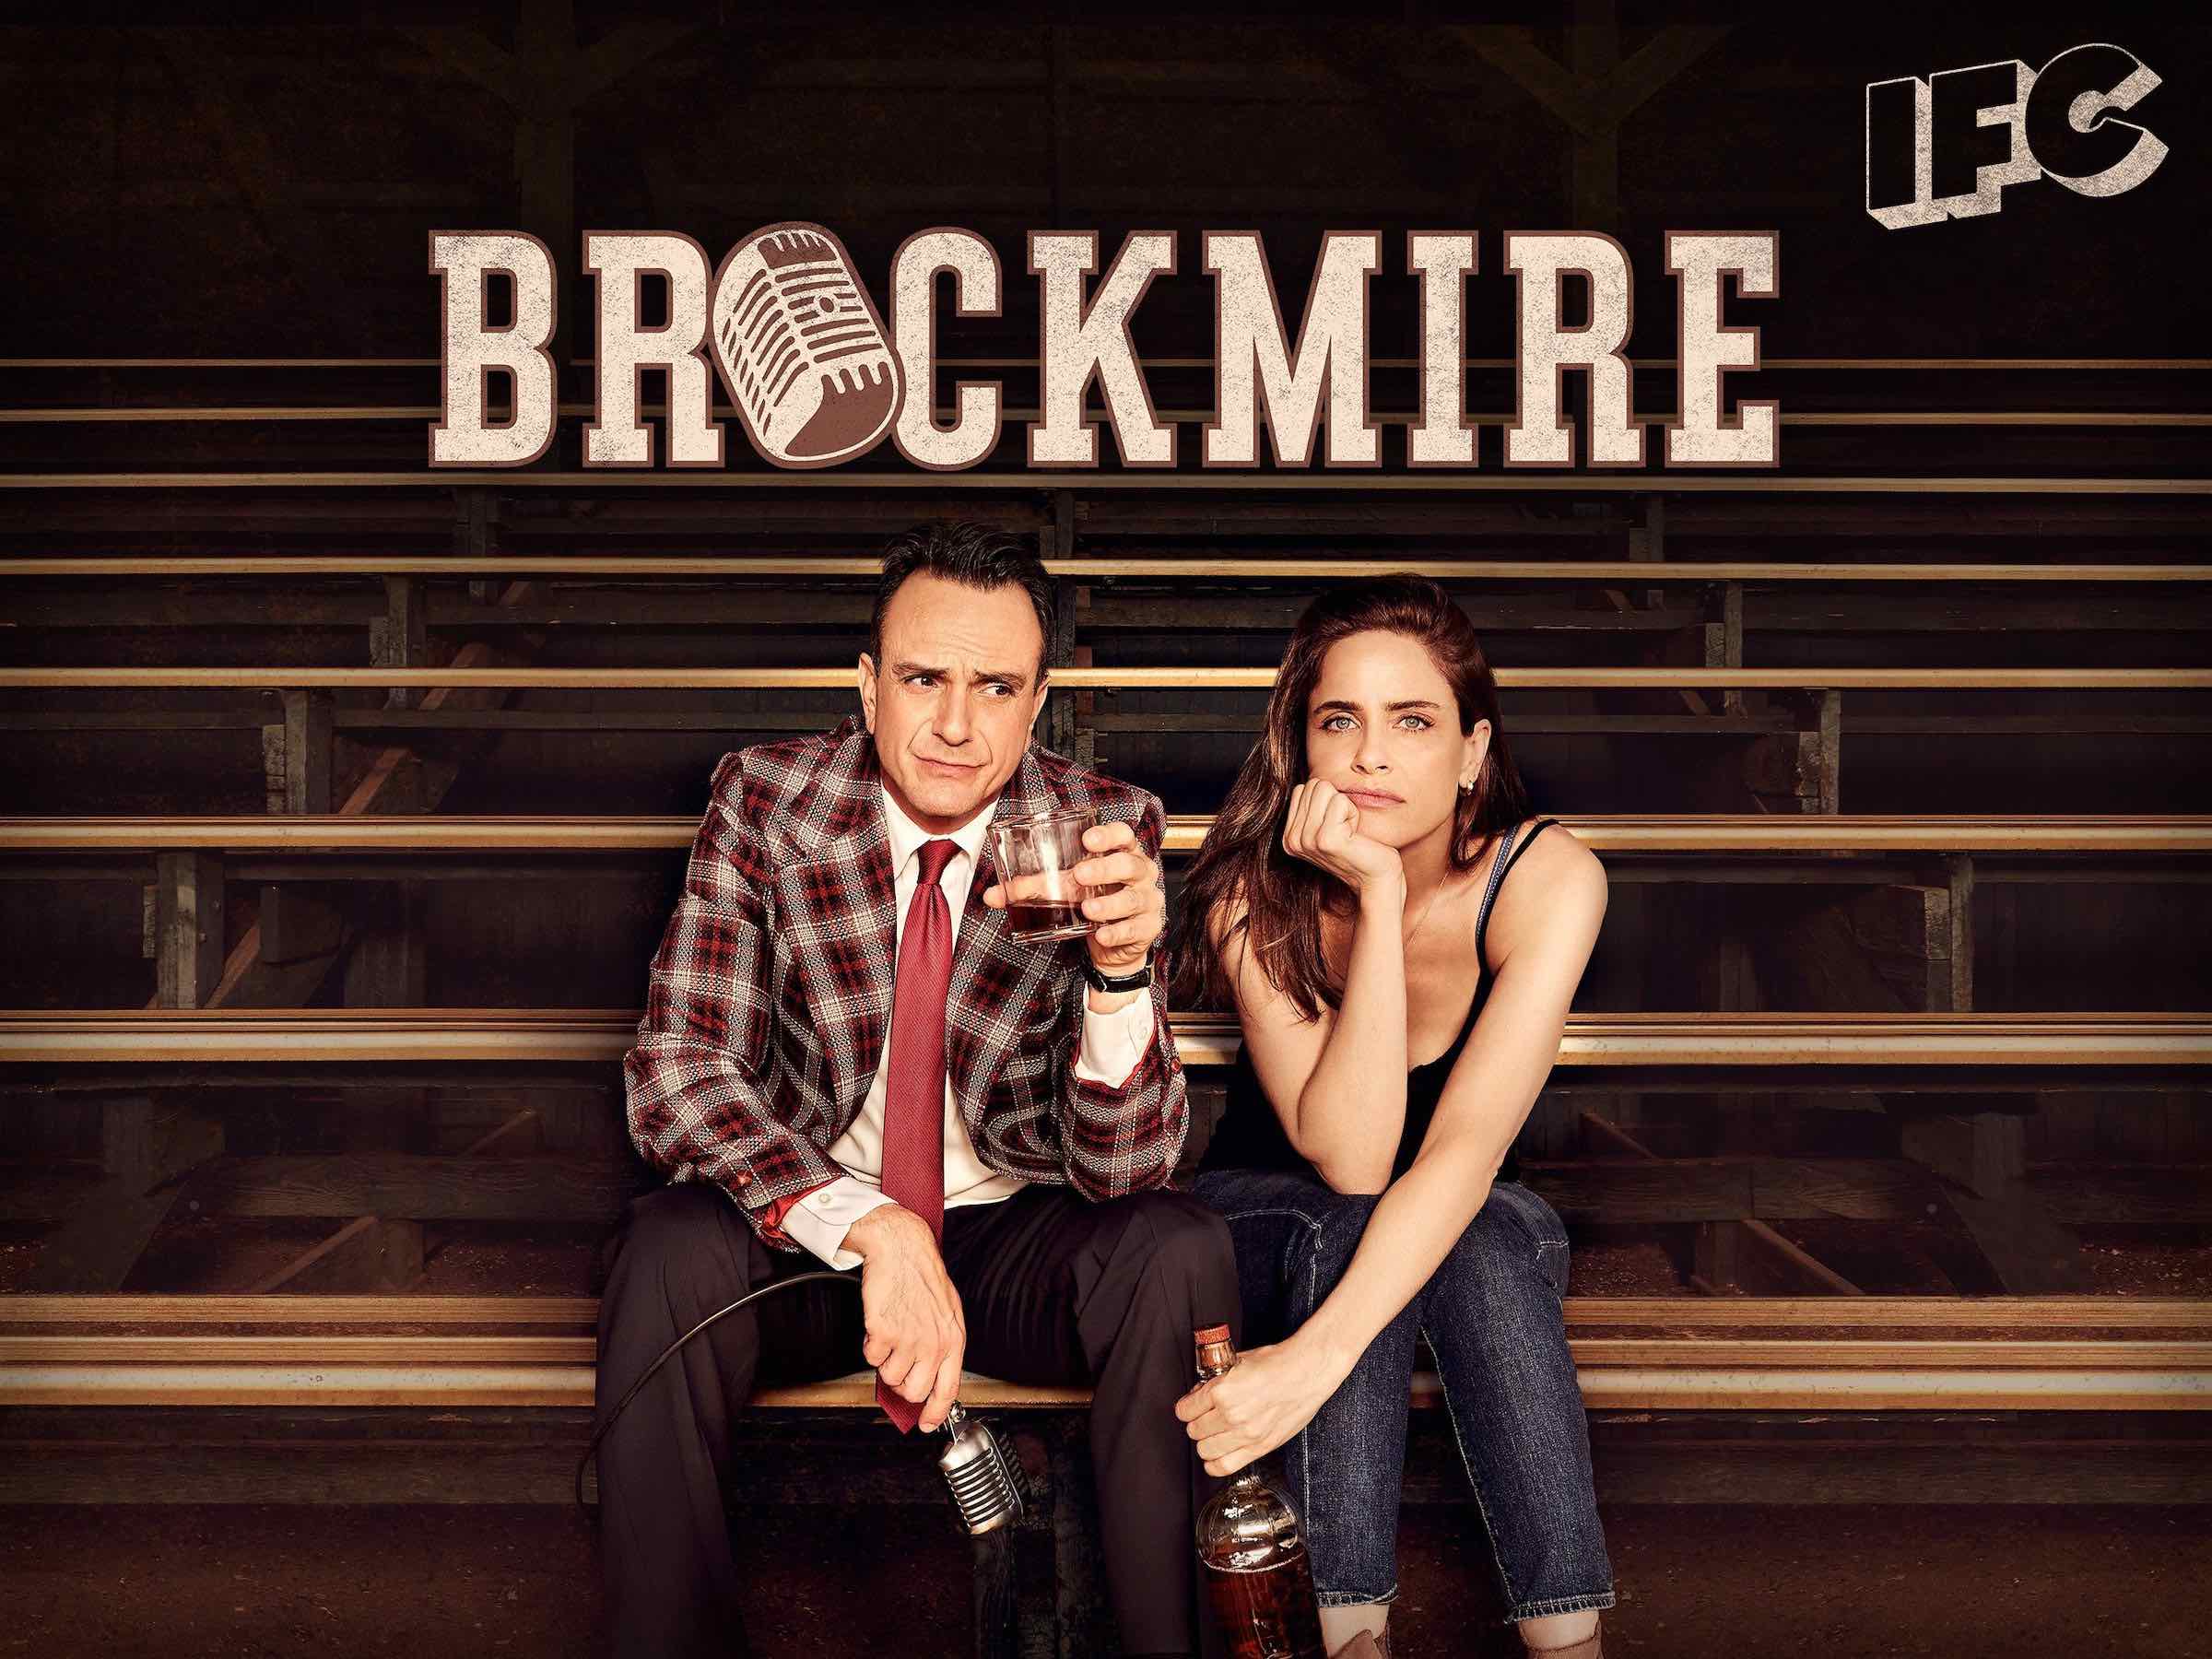 IFC’s 'Brockmire' swings for the fences in its fourth and final season premiering in March 2020. Here's everything you need to know about S4.